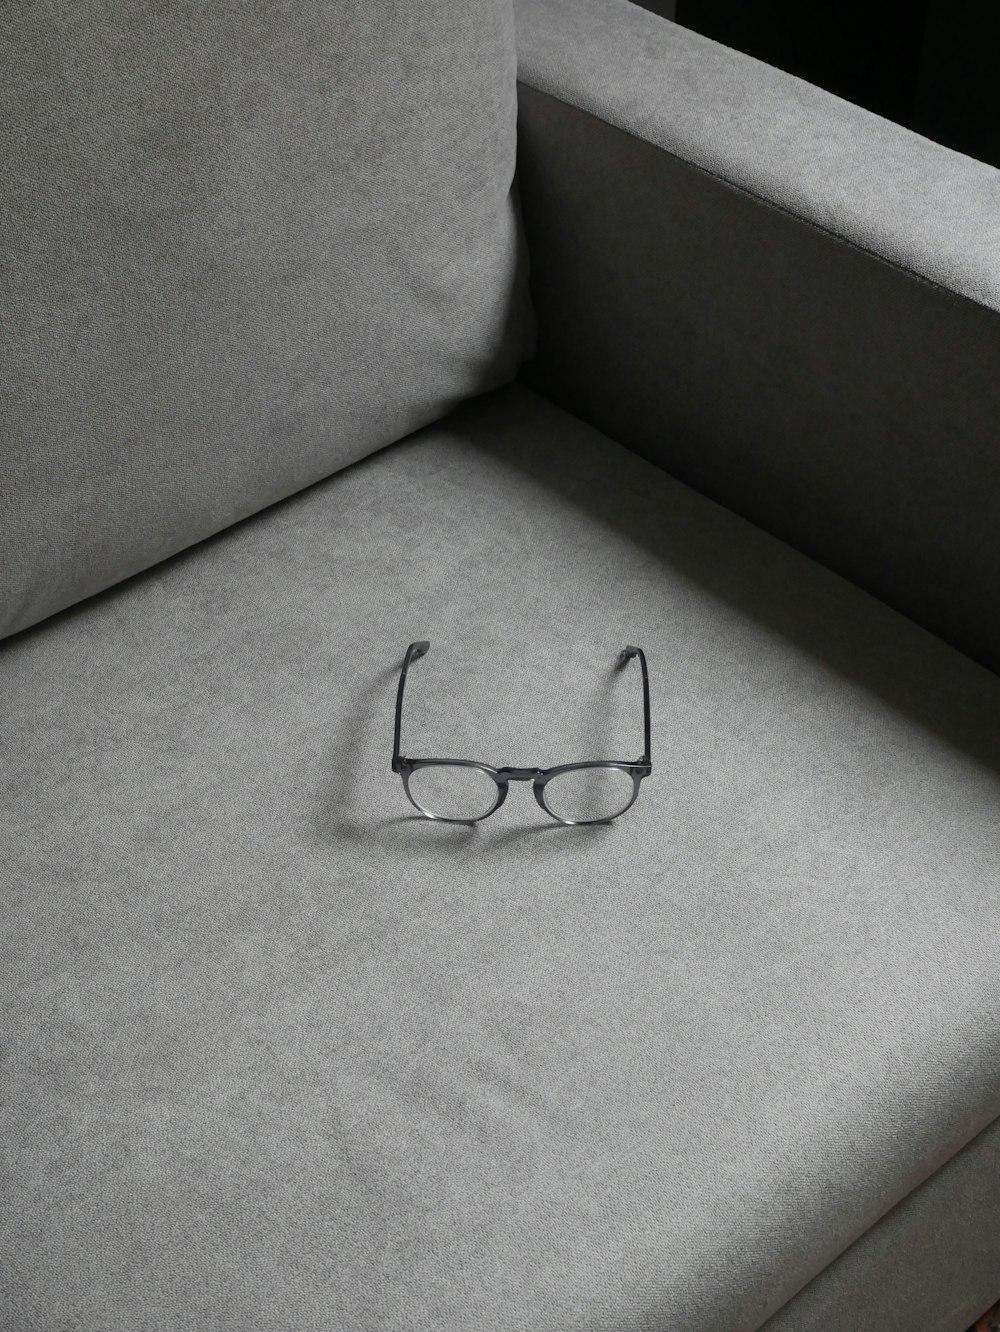 a pair of glasses on a couch